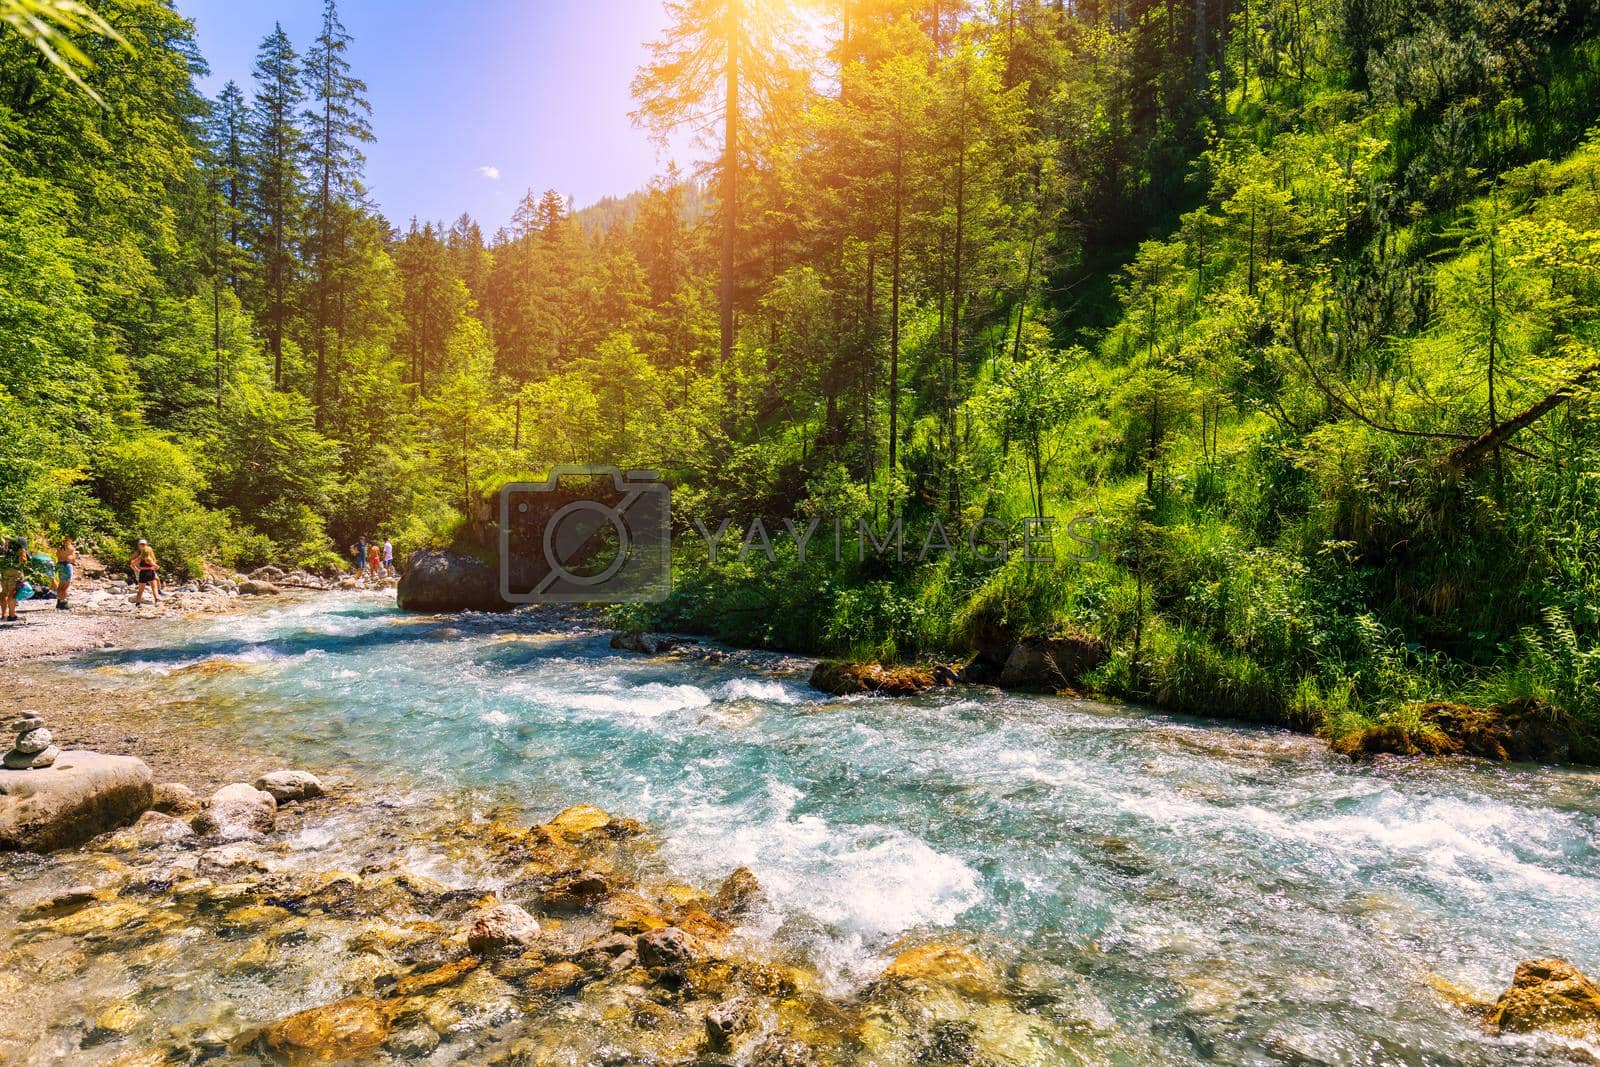 Royalty free image of Valley Wimbachtal in the Berchtesgaden Alps, Germany. Wimbach river in the national park Berchtesgaden, Bayern, Germany. by DaLiu